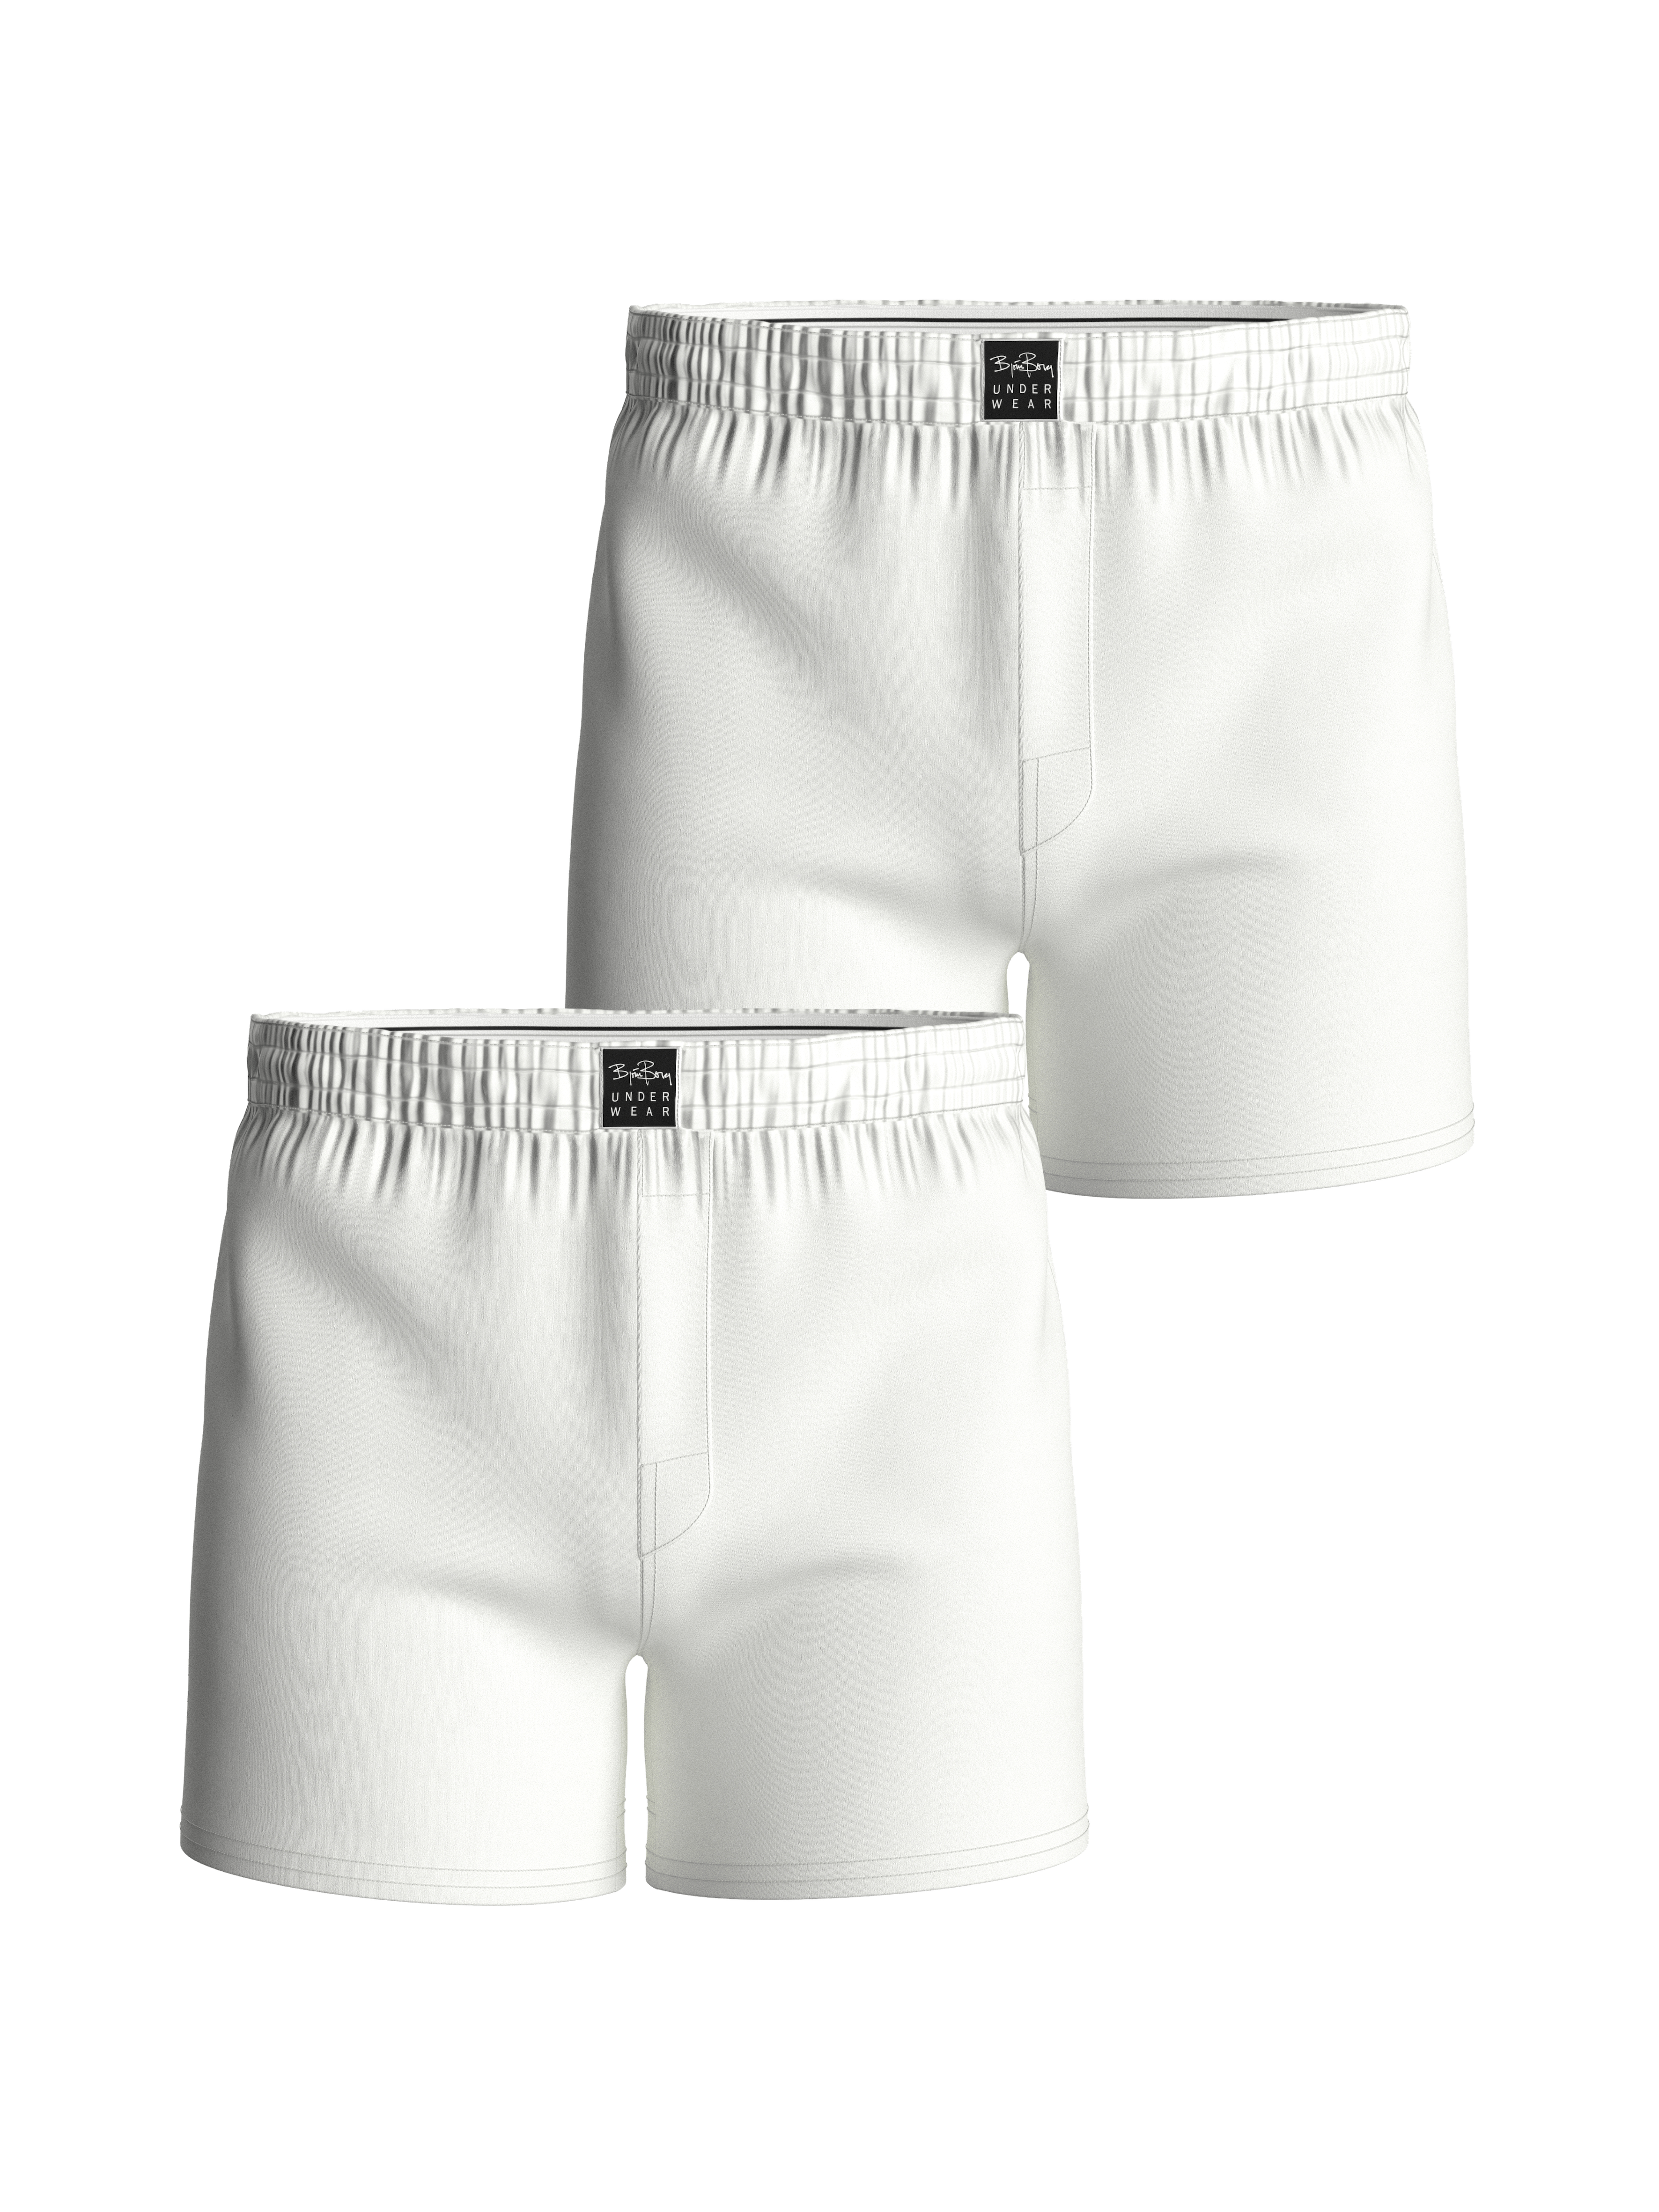 Björn Borg Mens 2 Pack Boxer Shorts Underwear Classic Fit Stretch Elasticated 